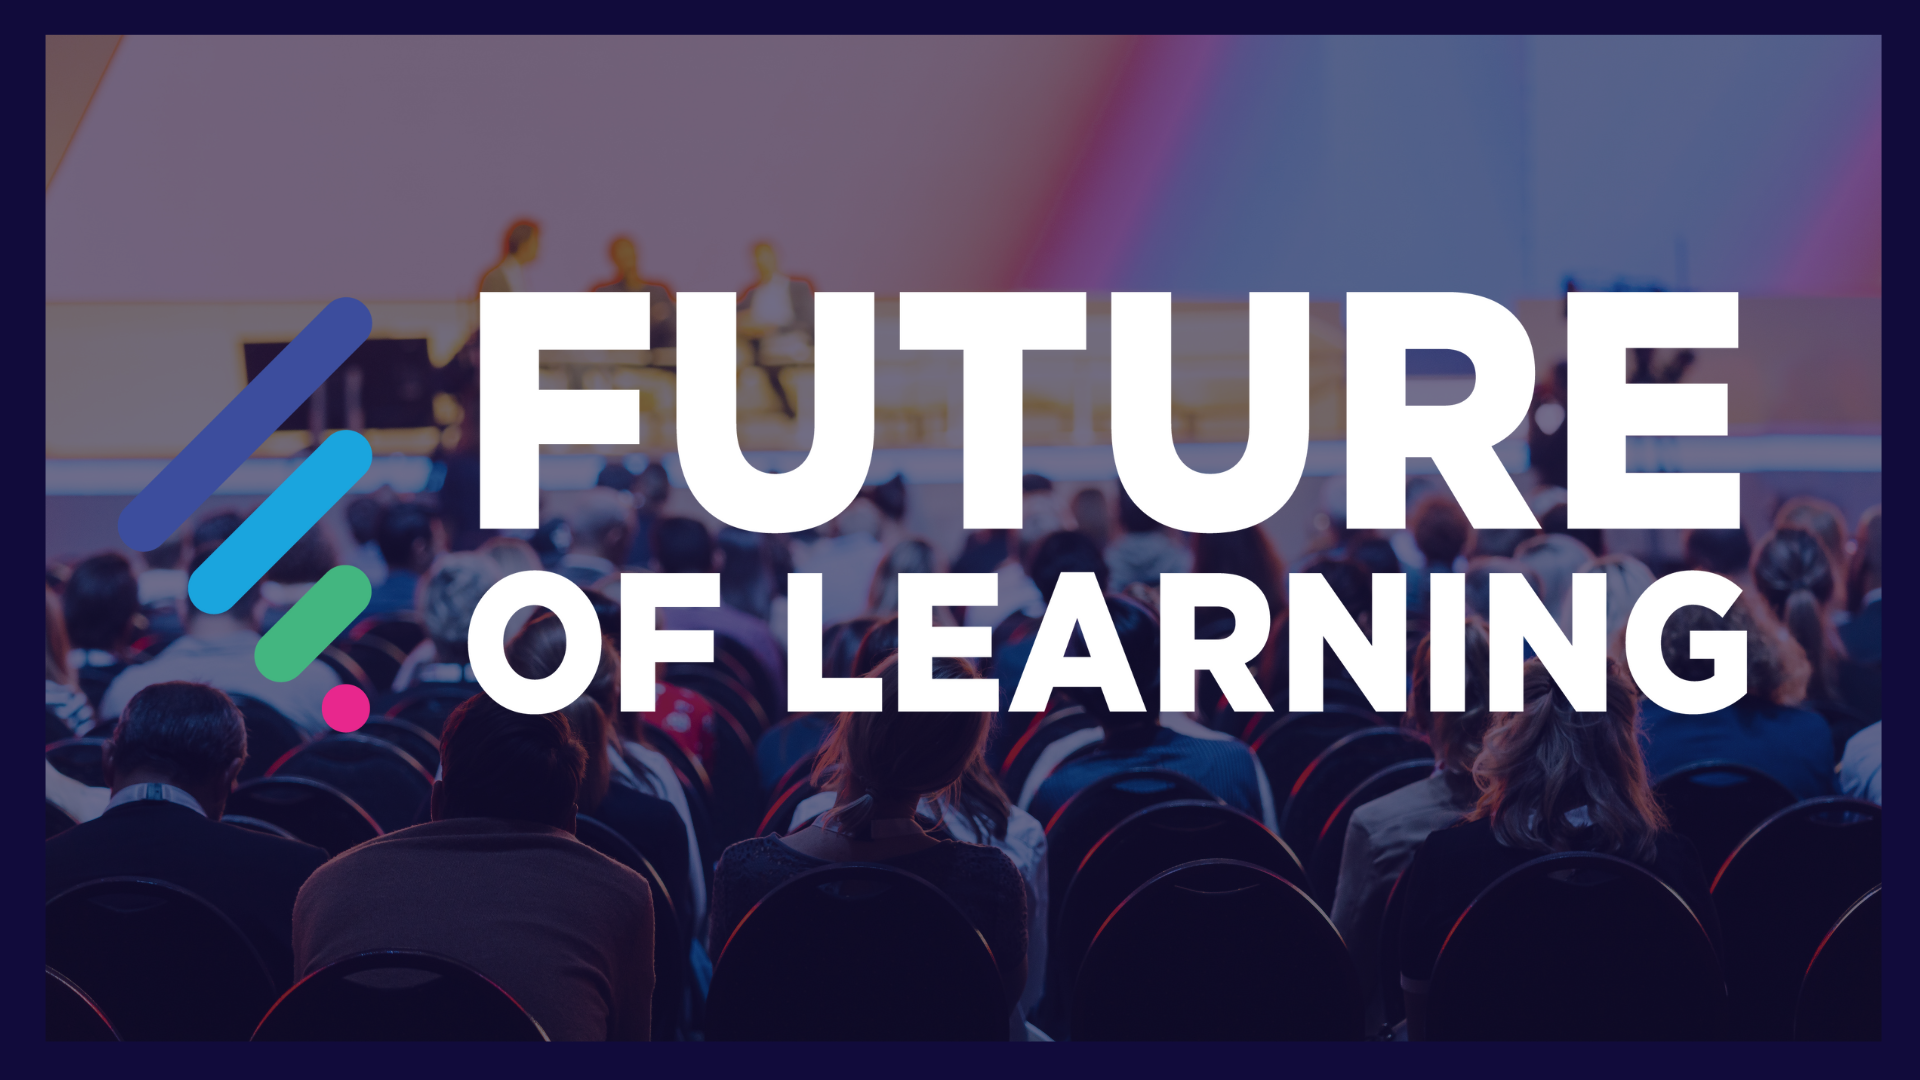 FUTURE OF LEARNING